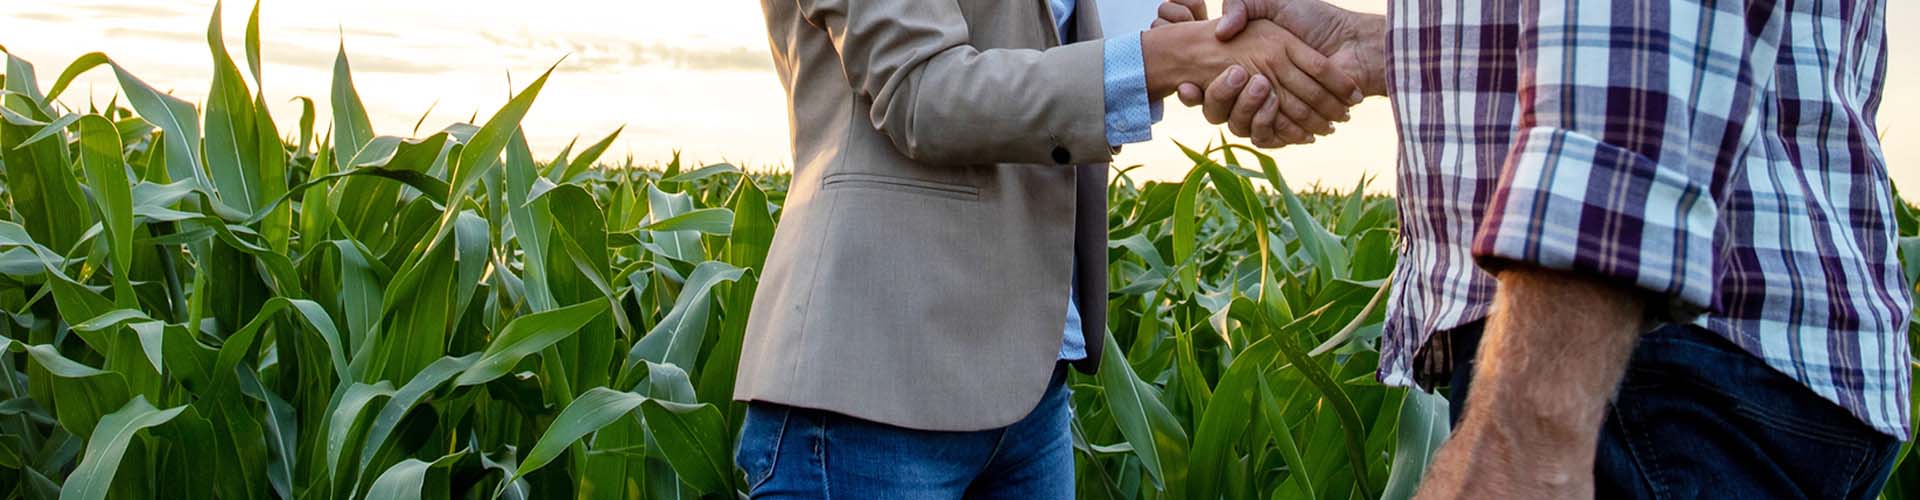 business meeting in a corn field